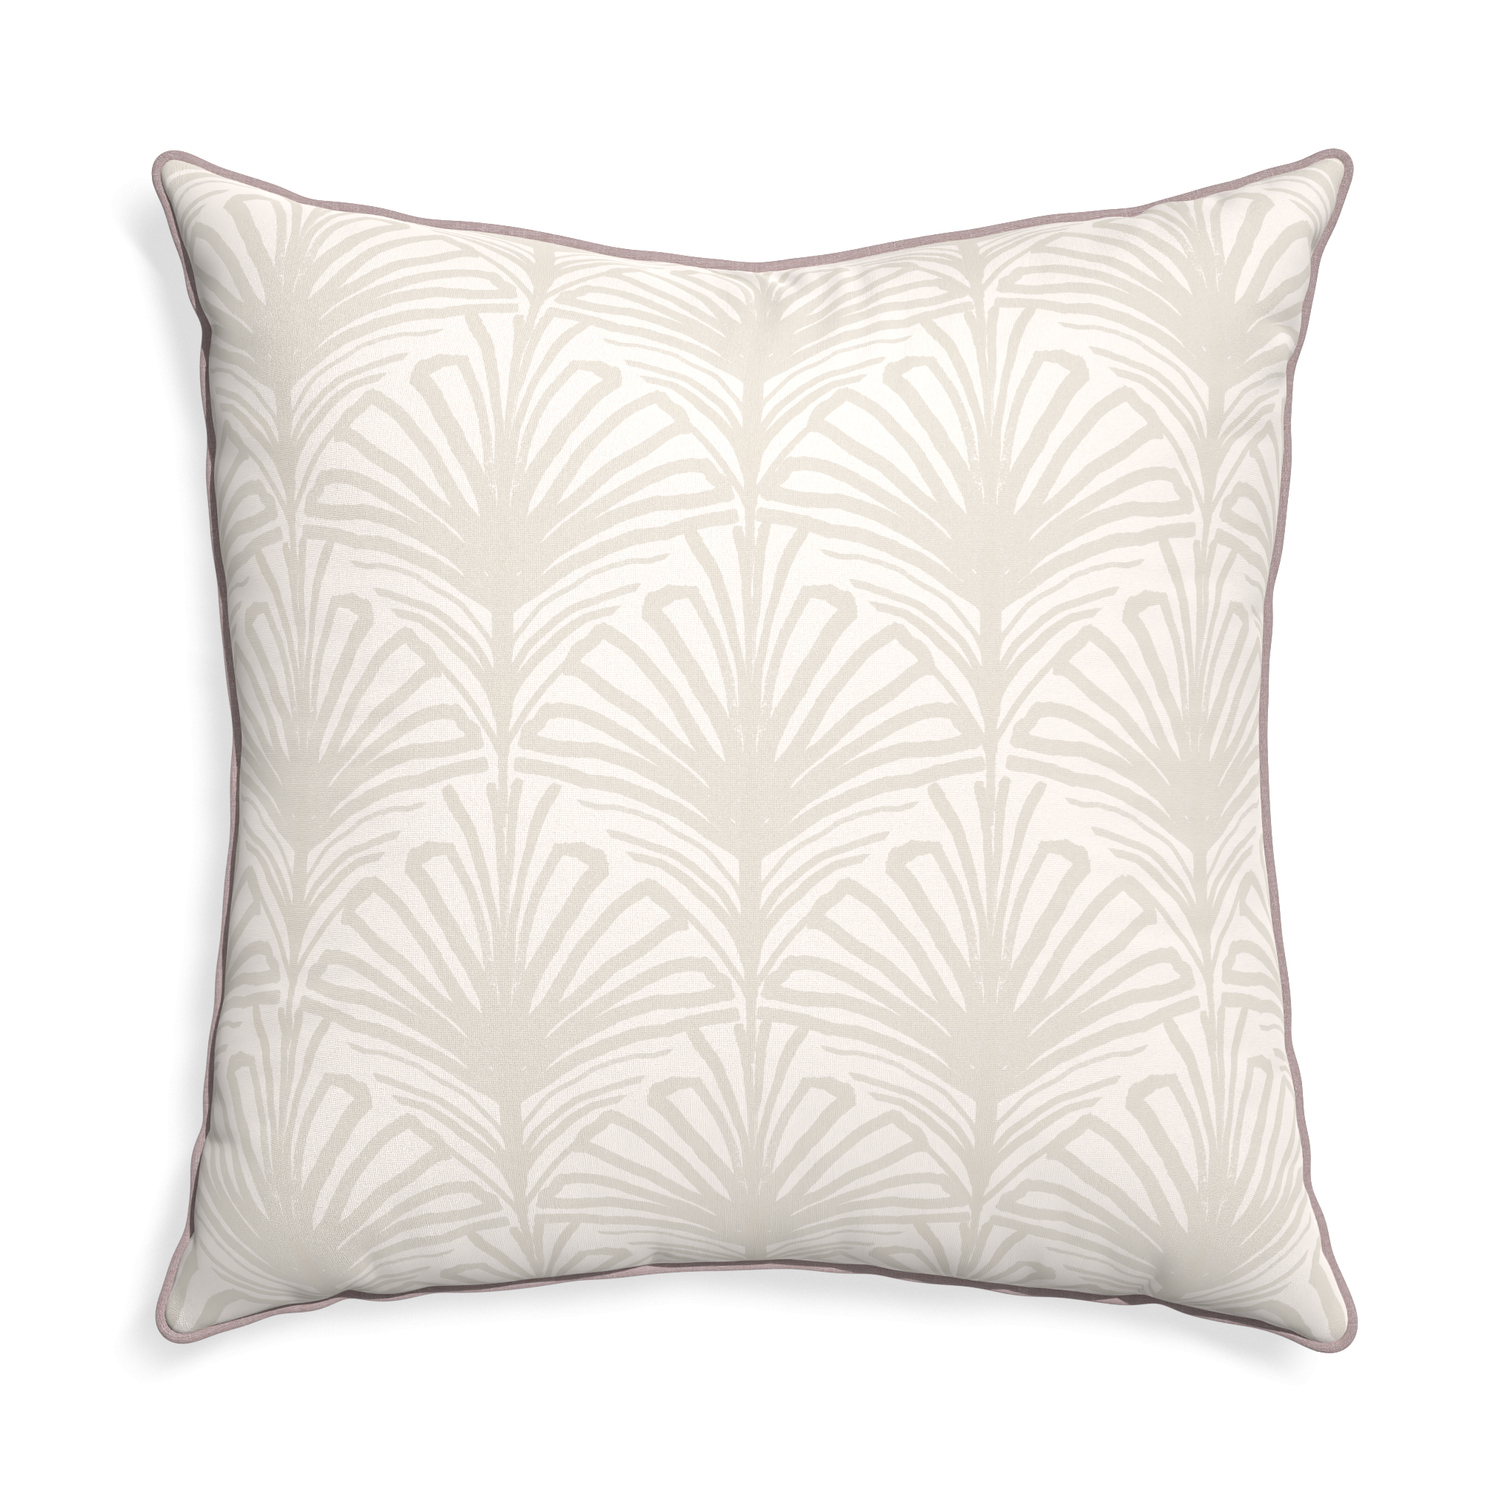 Euro-sham suzy sand custom beige palmpillow with orchid piping on white background